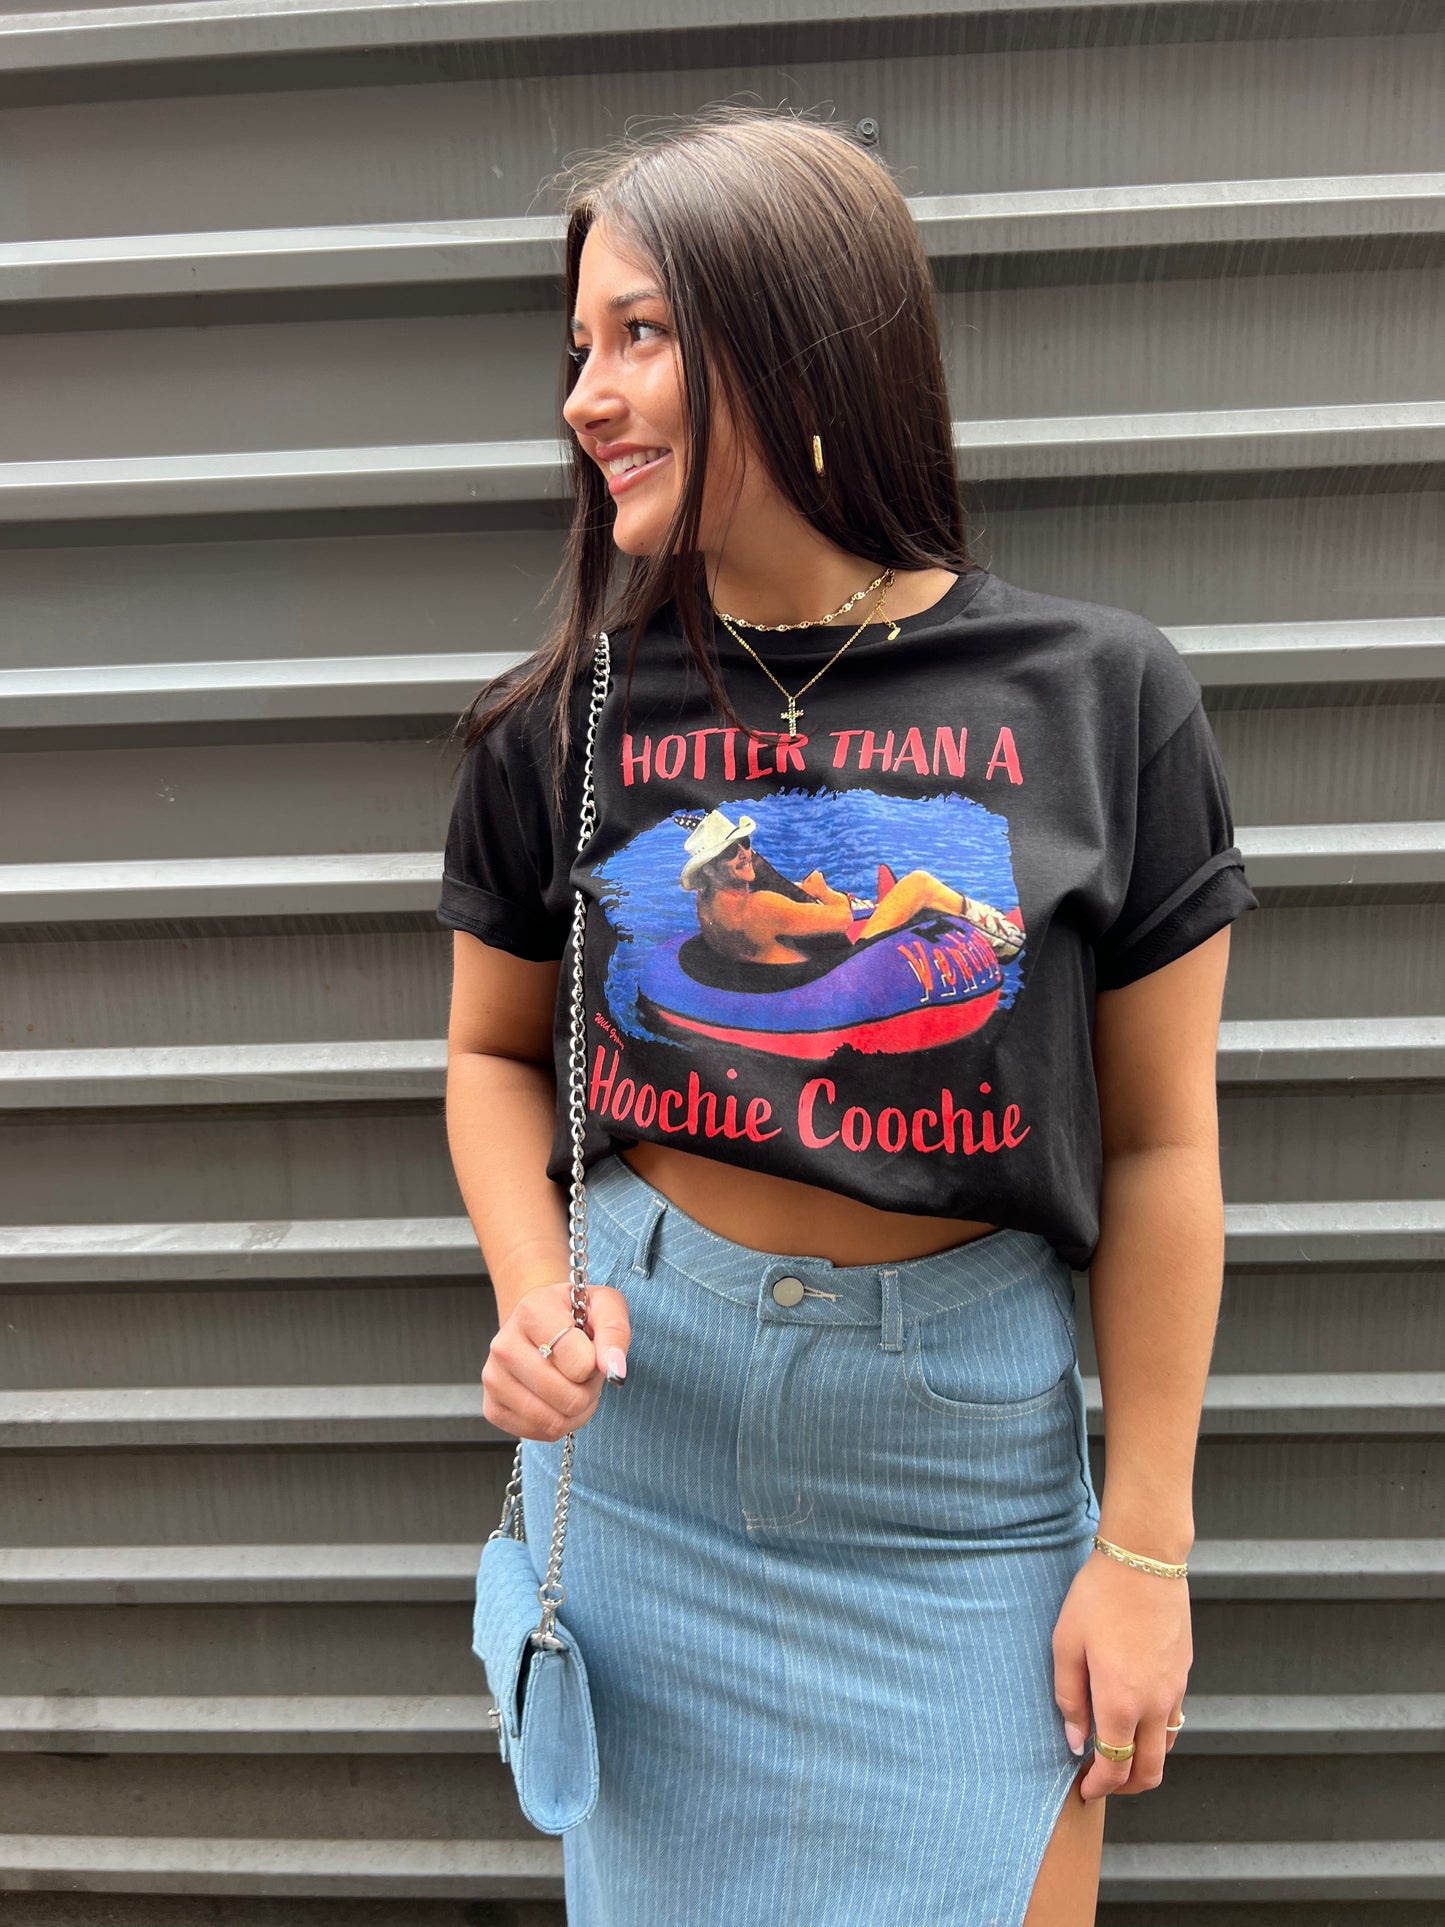 denim skirt and graphic tee outfit inspo